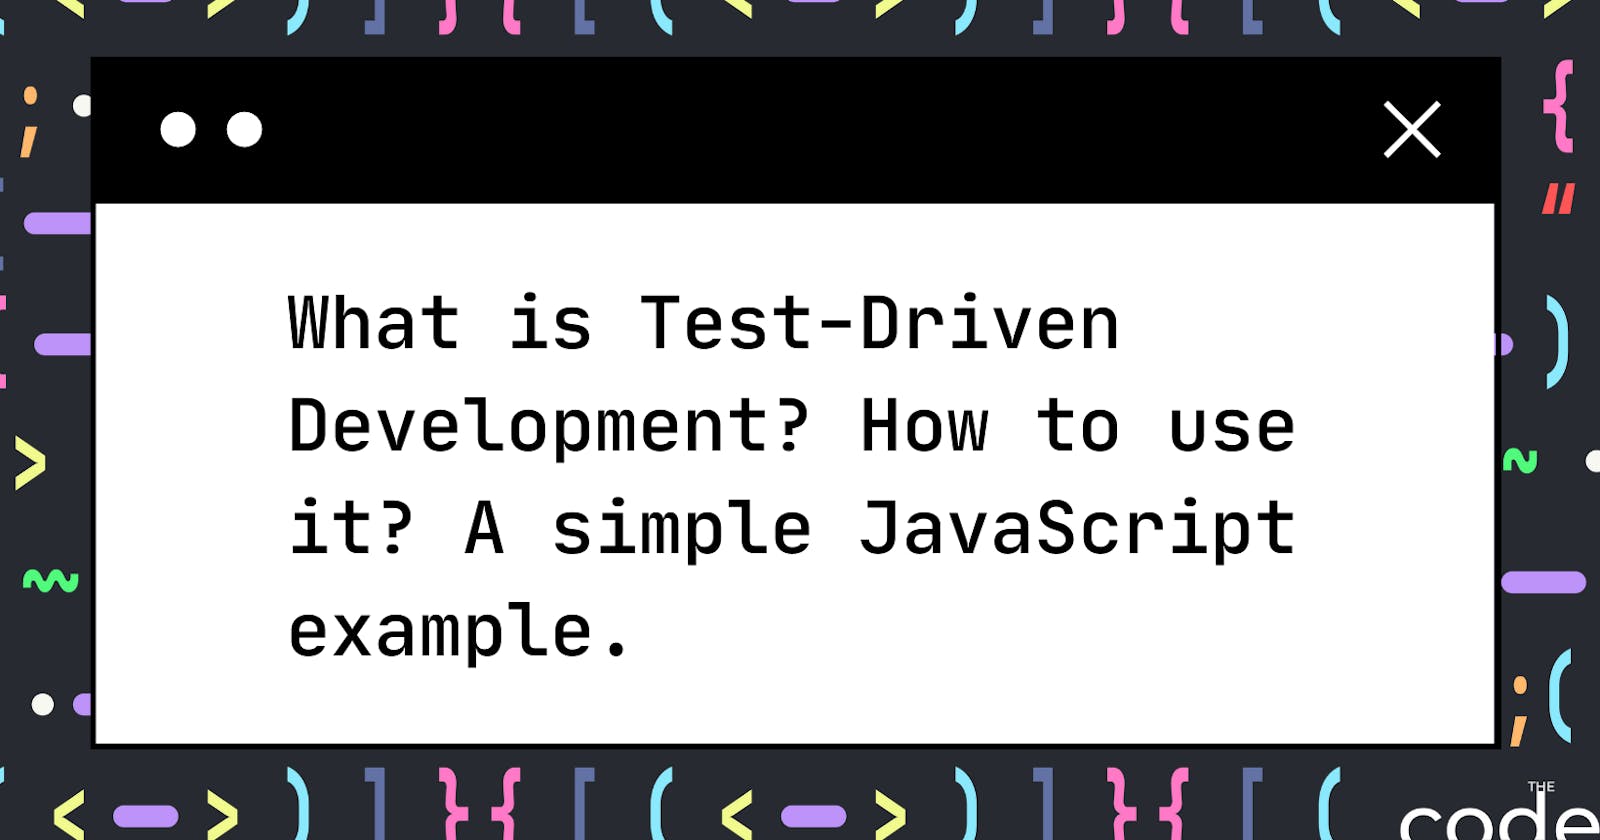 What is Test-Driven Development? How to use it? A simple JavaScript example.